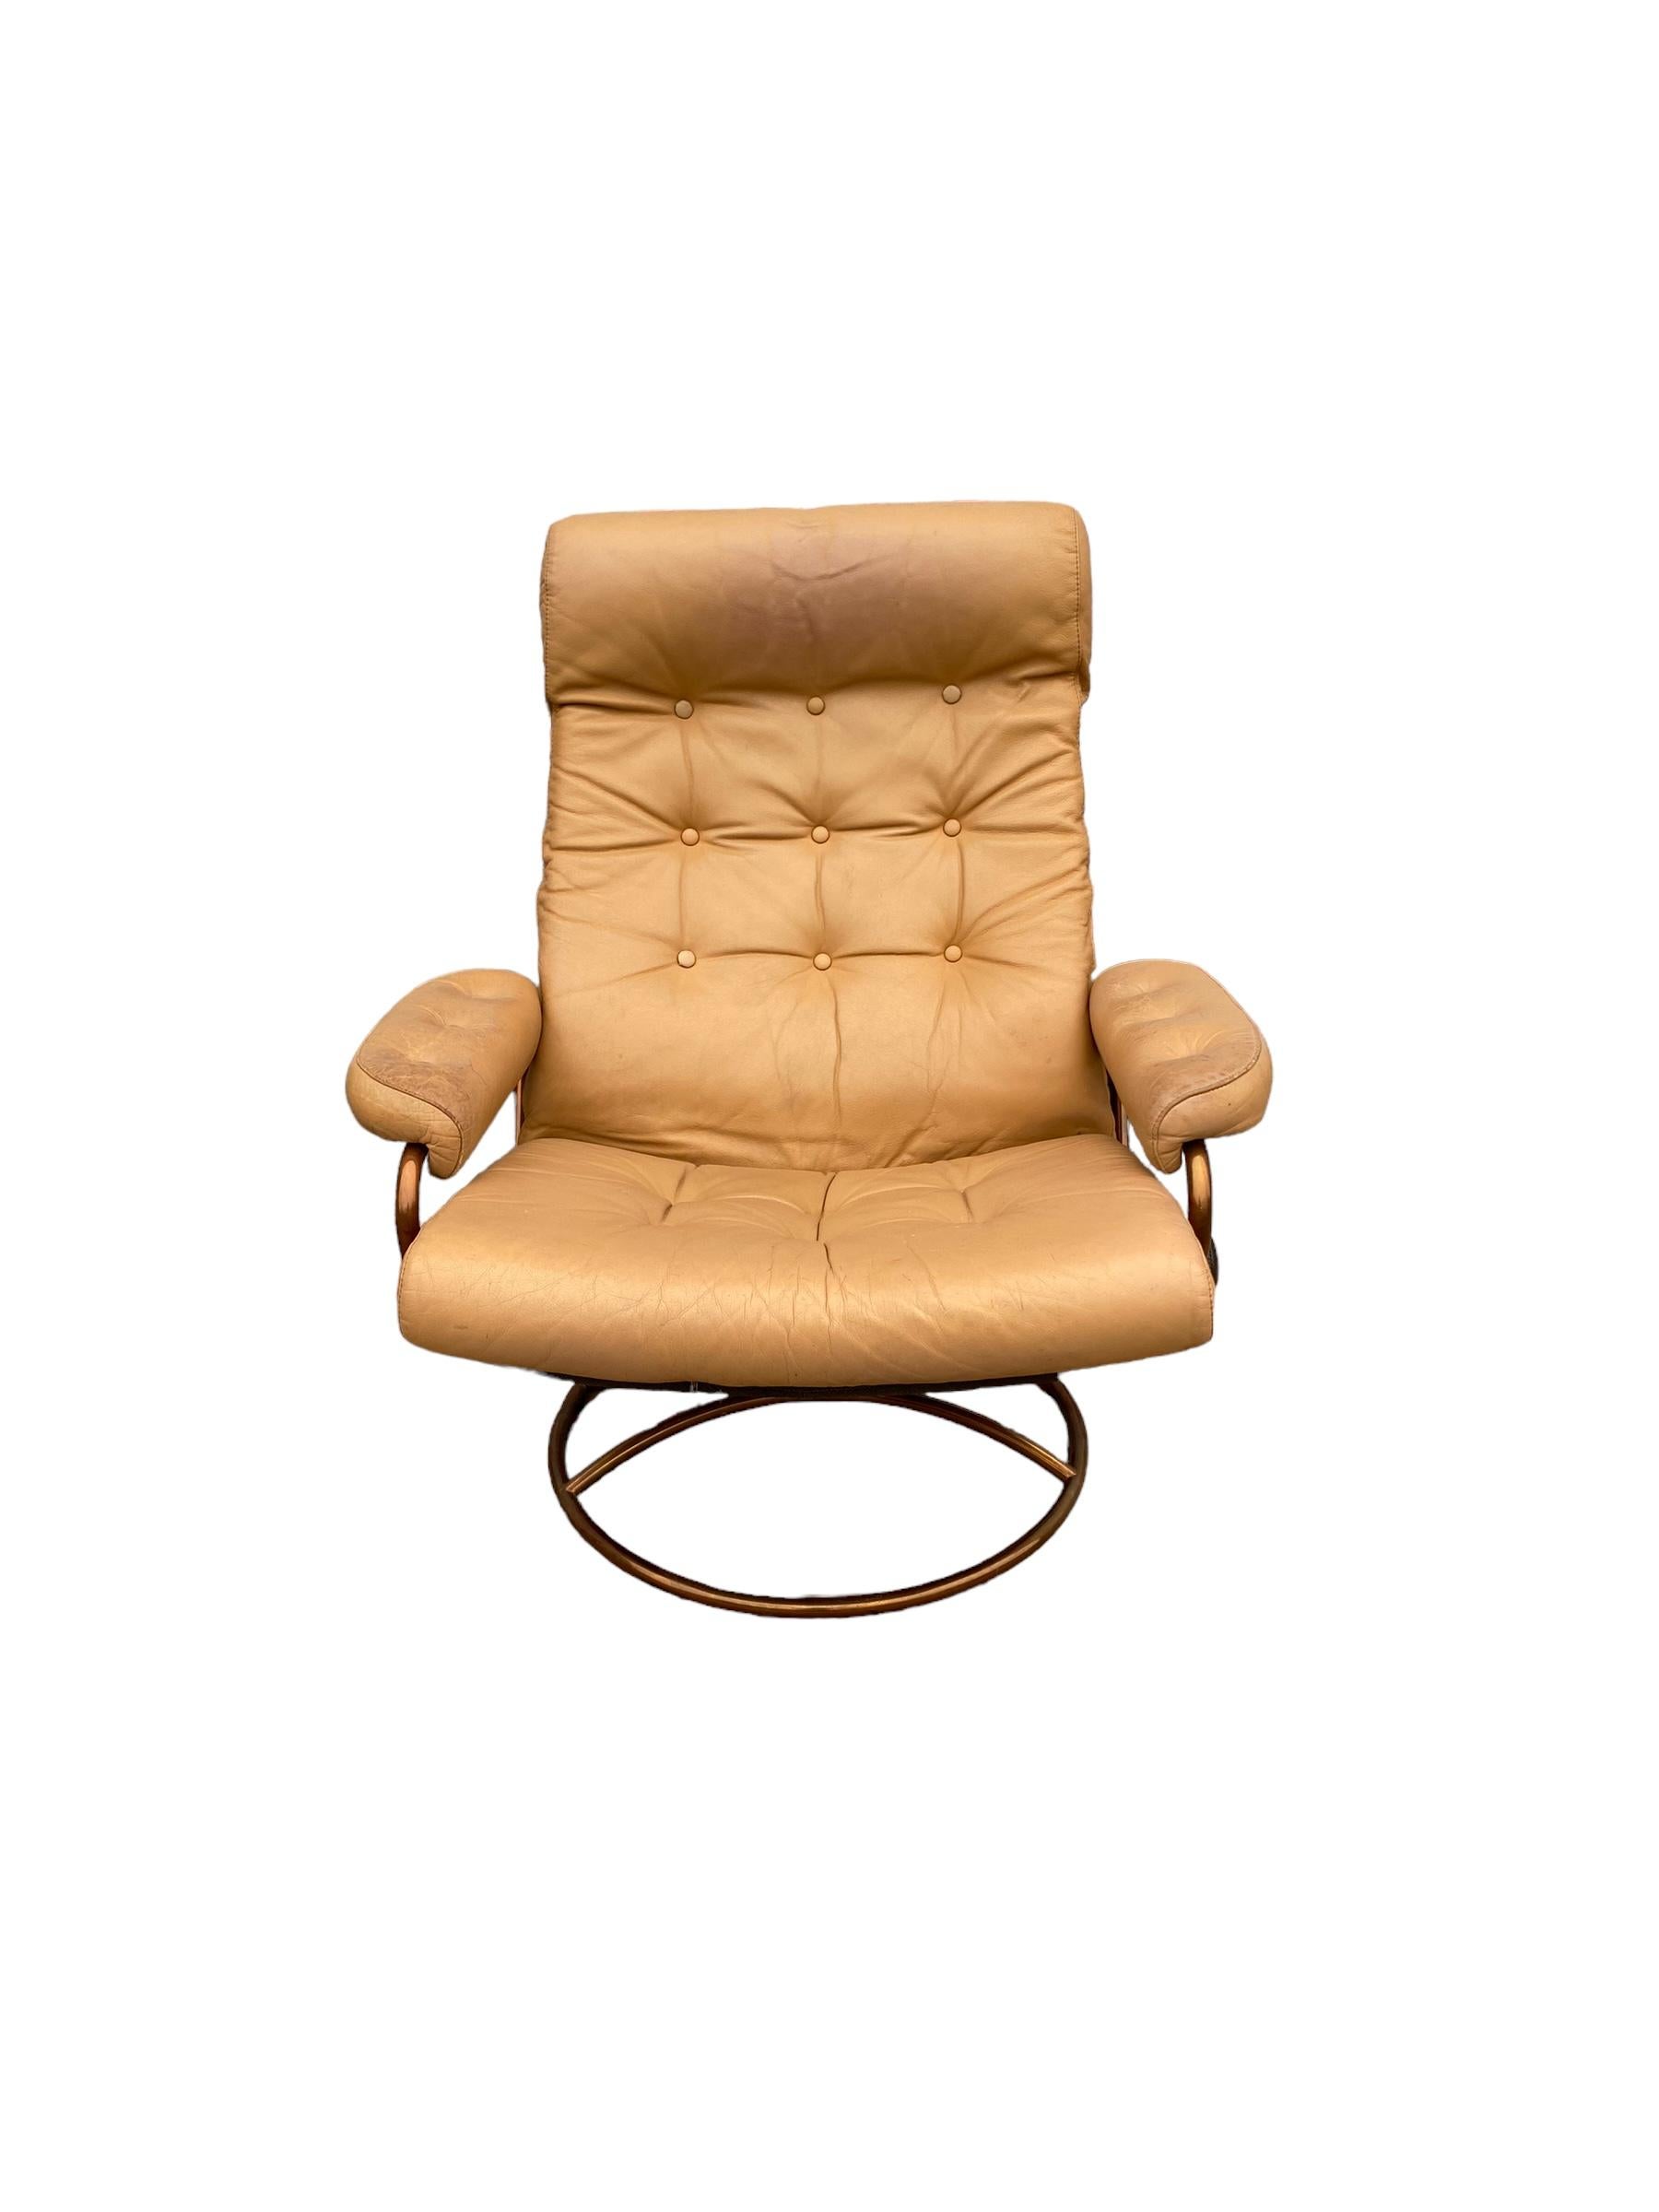 Norwegian Ekornes Stressless Reclining Lounge Chair and Ottoman in Cream with Copper Frame For Sale